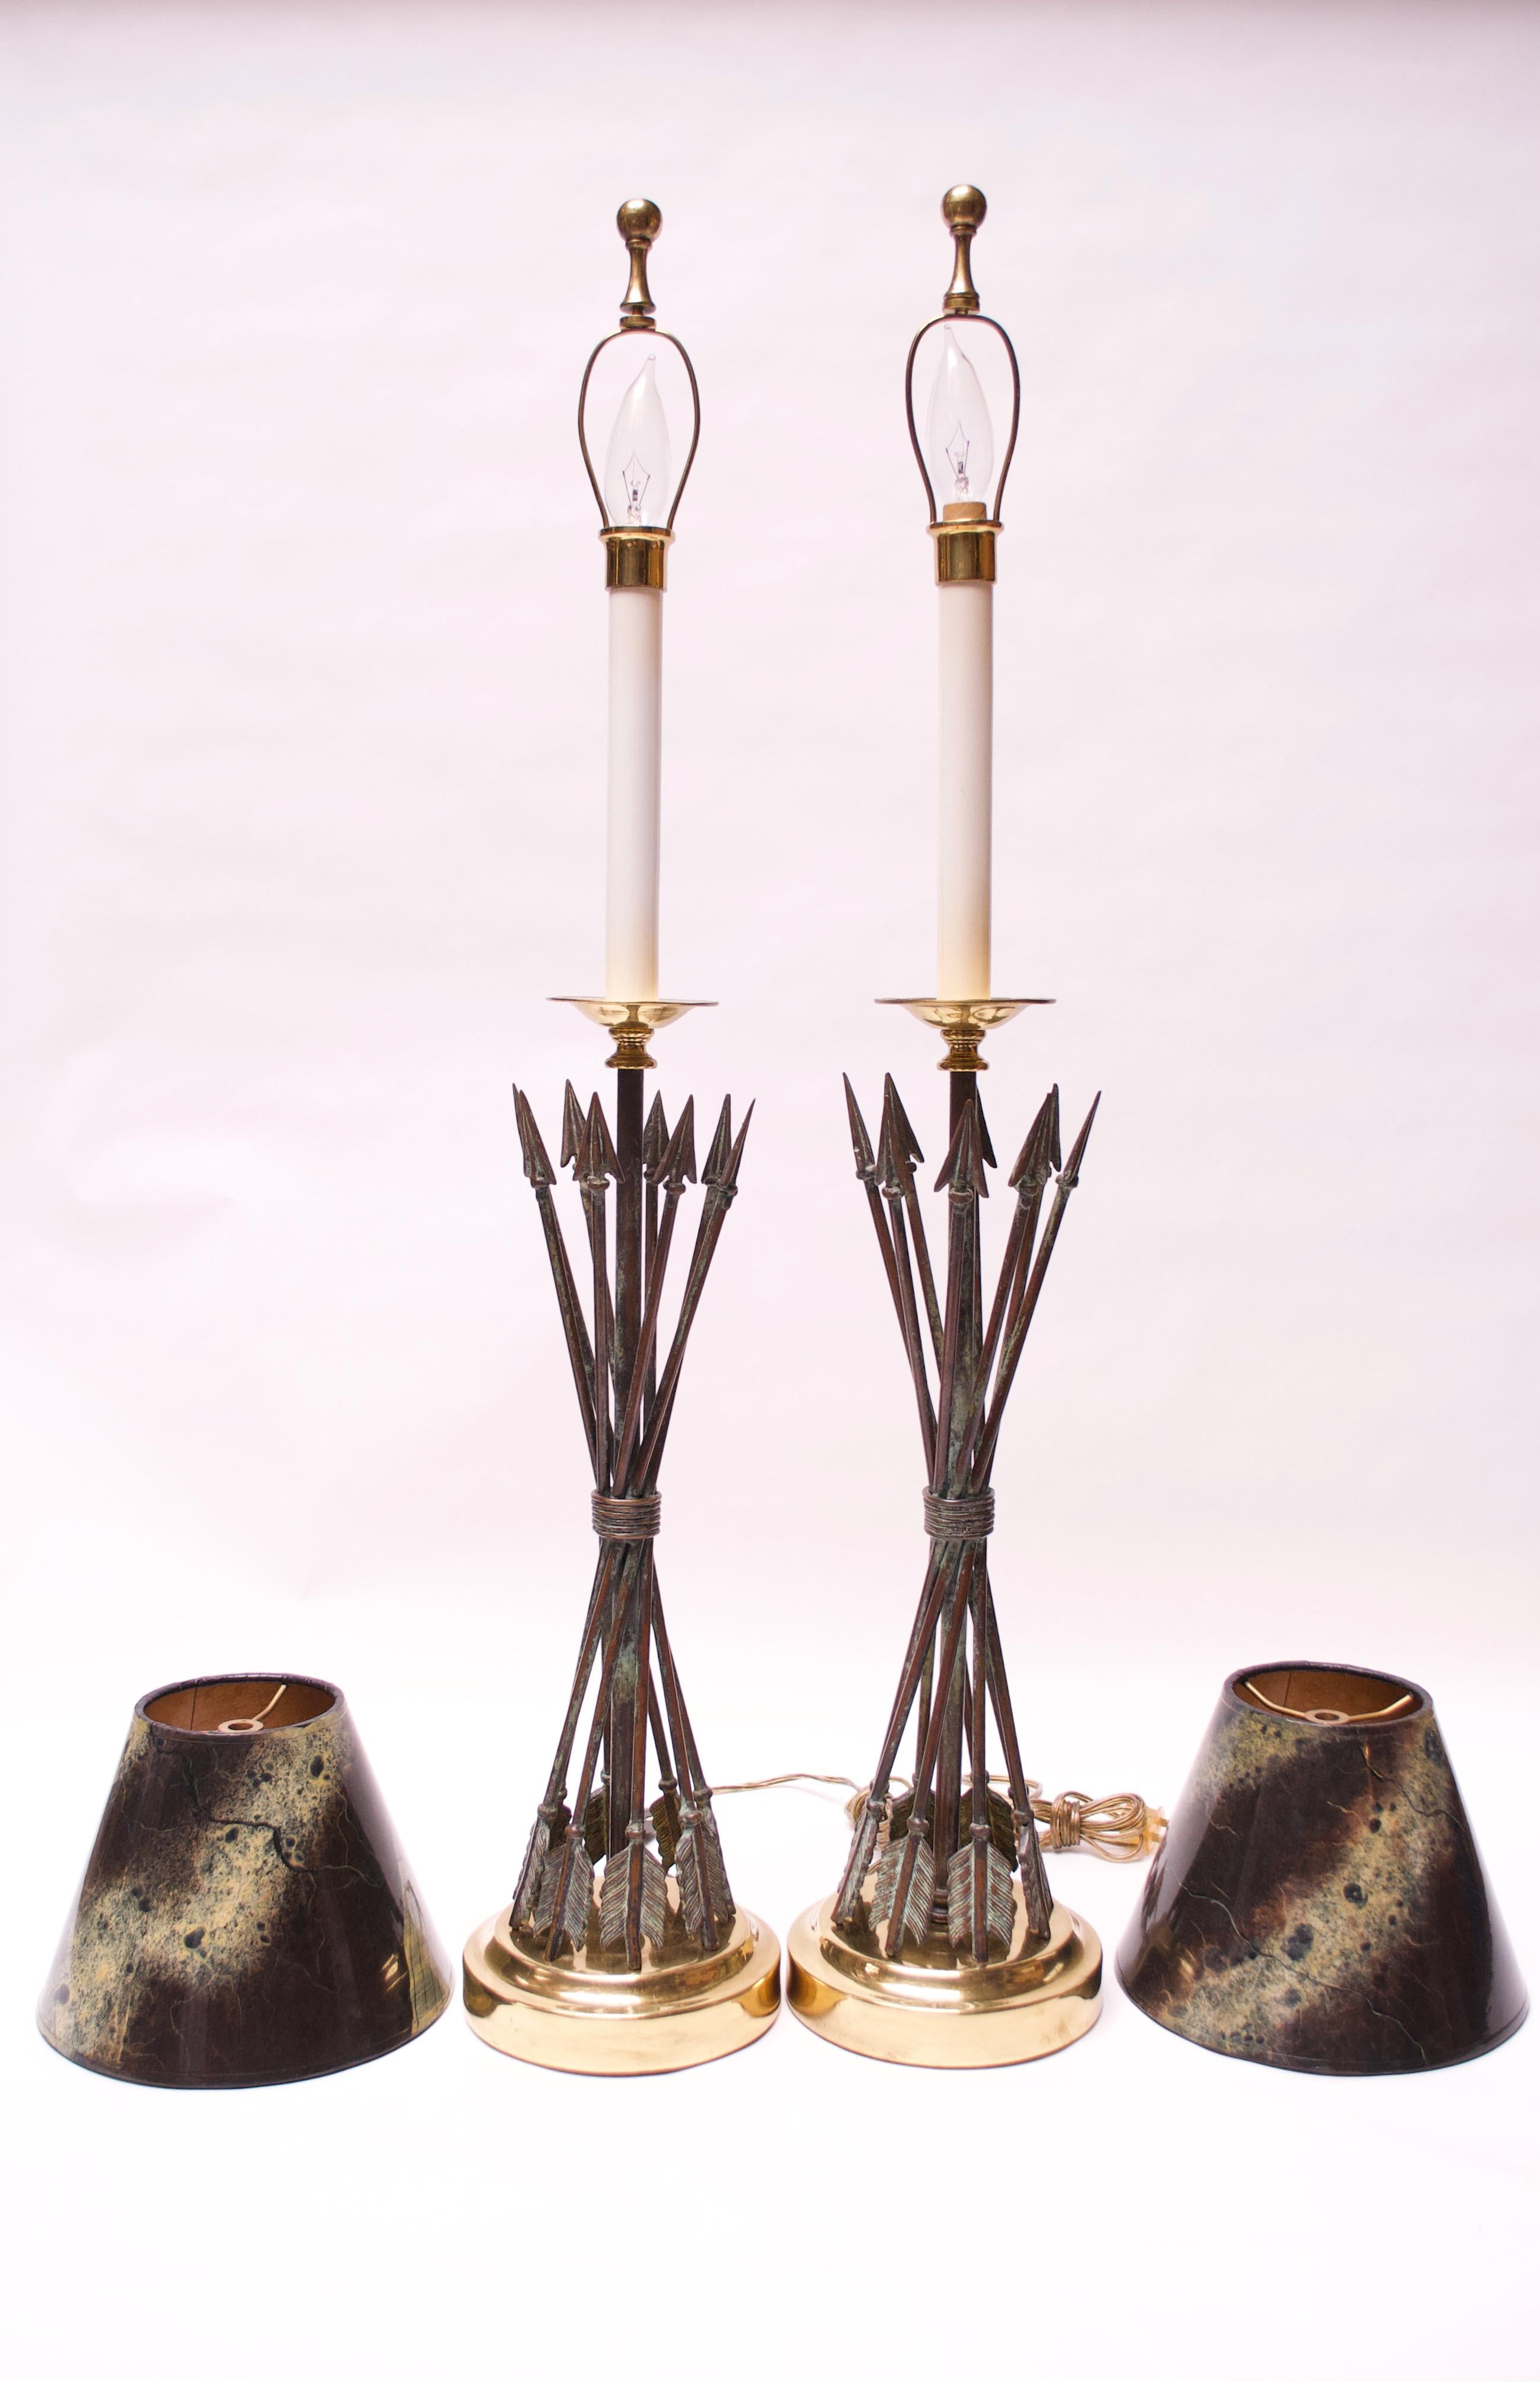 Pair of Maitland Smith tables lamps with crossed arrow motif in a verdigris-bronze finish with brass base, finials, and accents (1980s, Philippines). 
Exceptional, complete examples, retaining their original shades. 
Retains the 